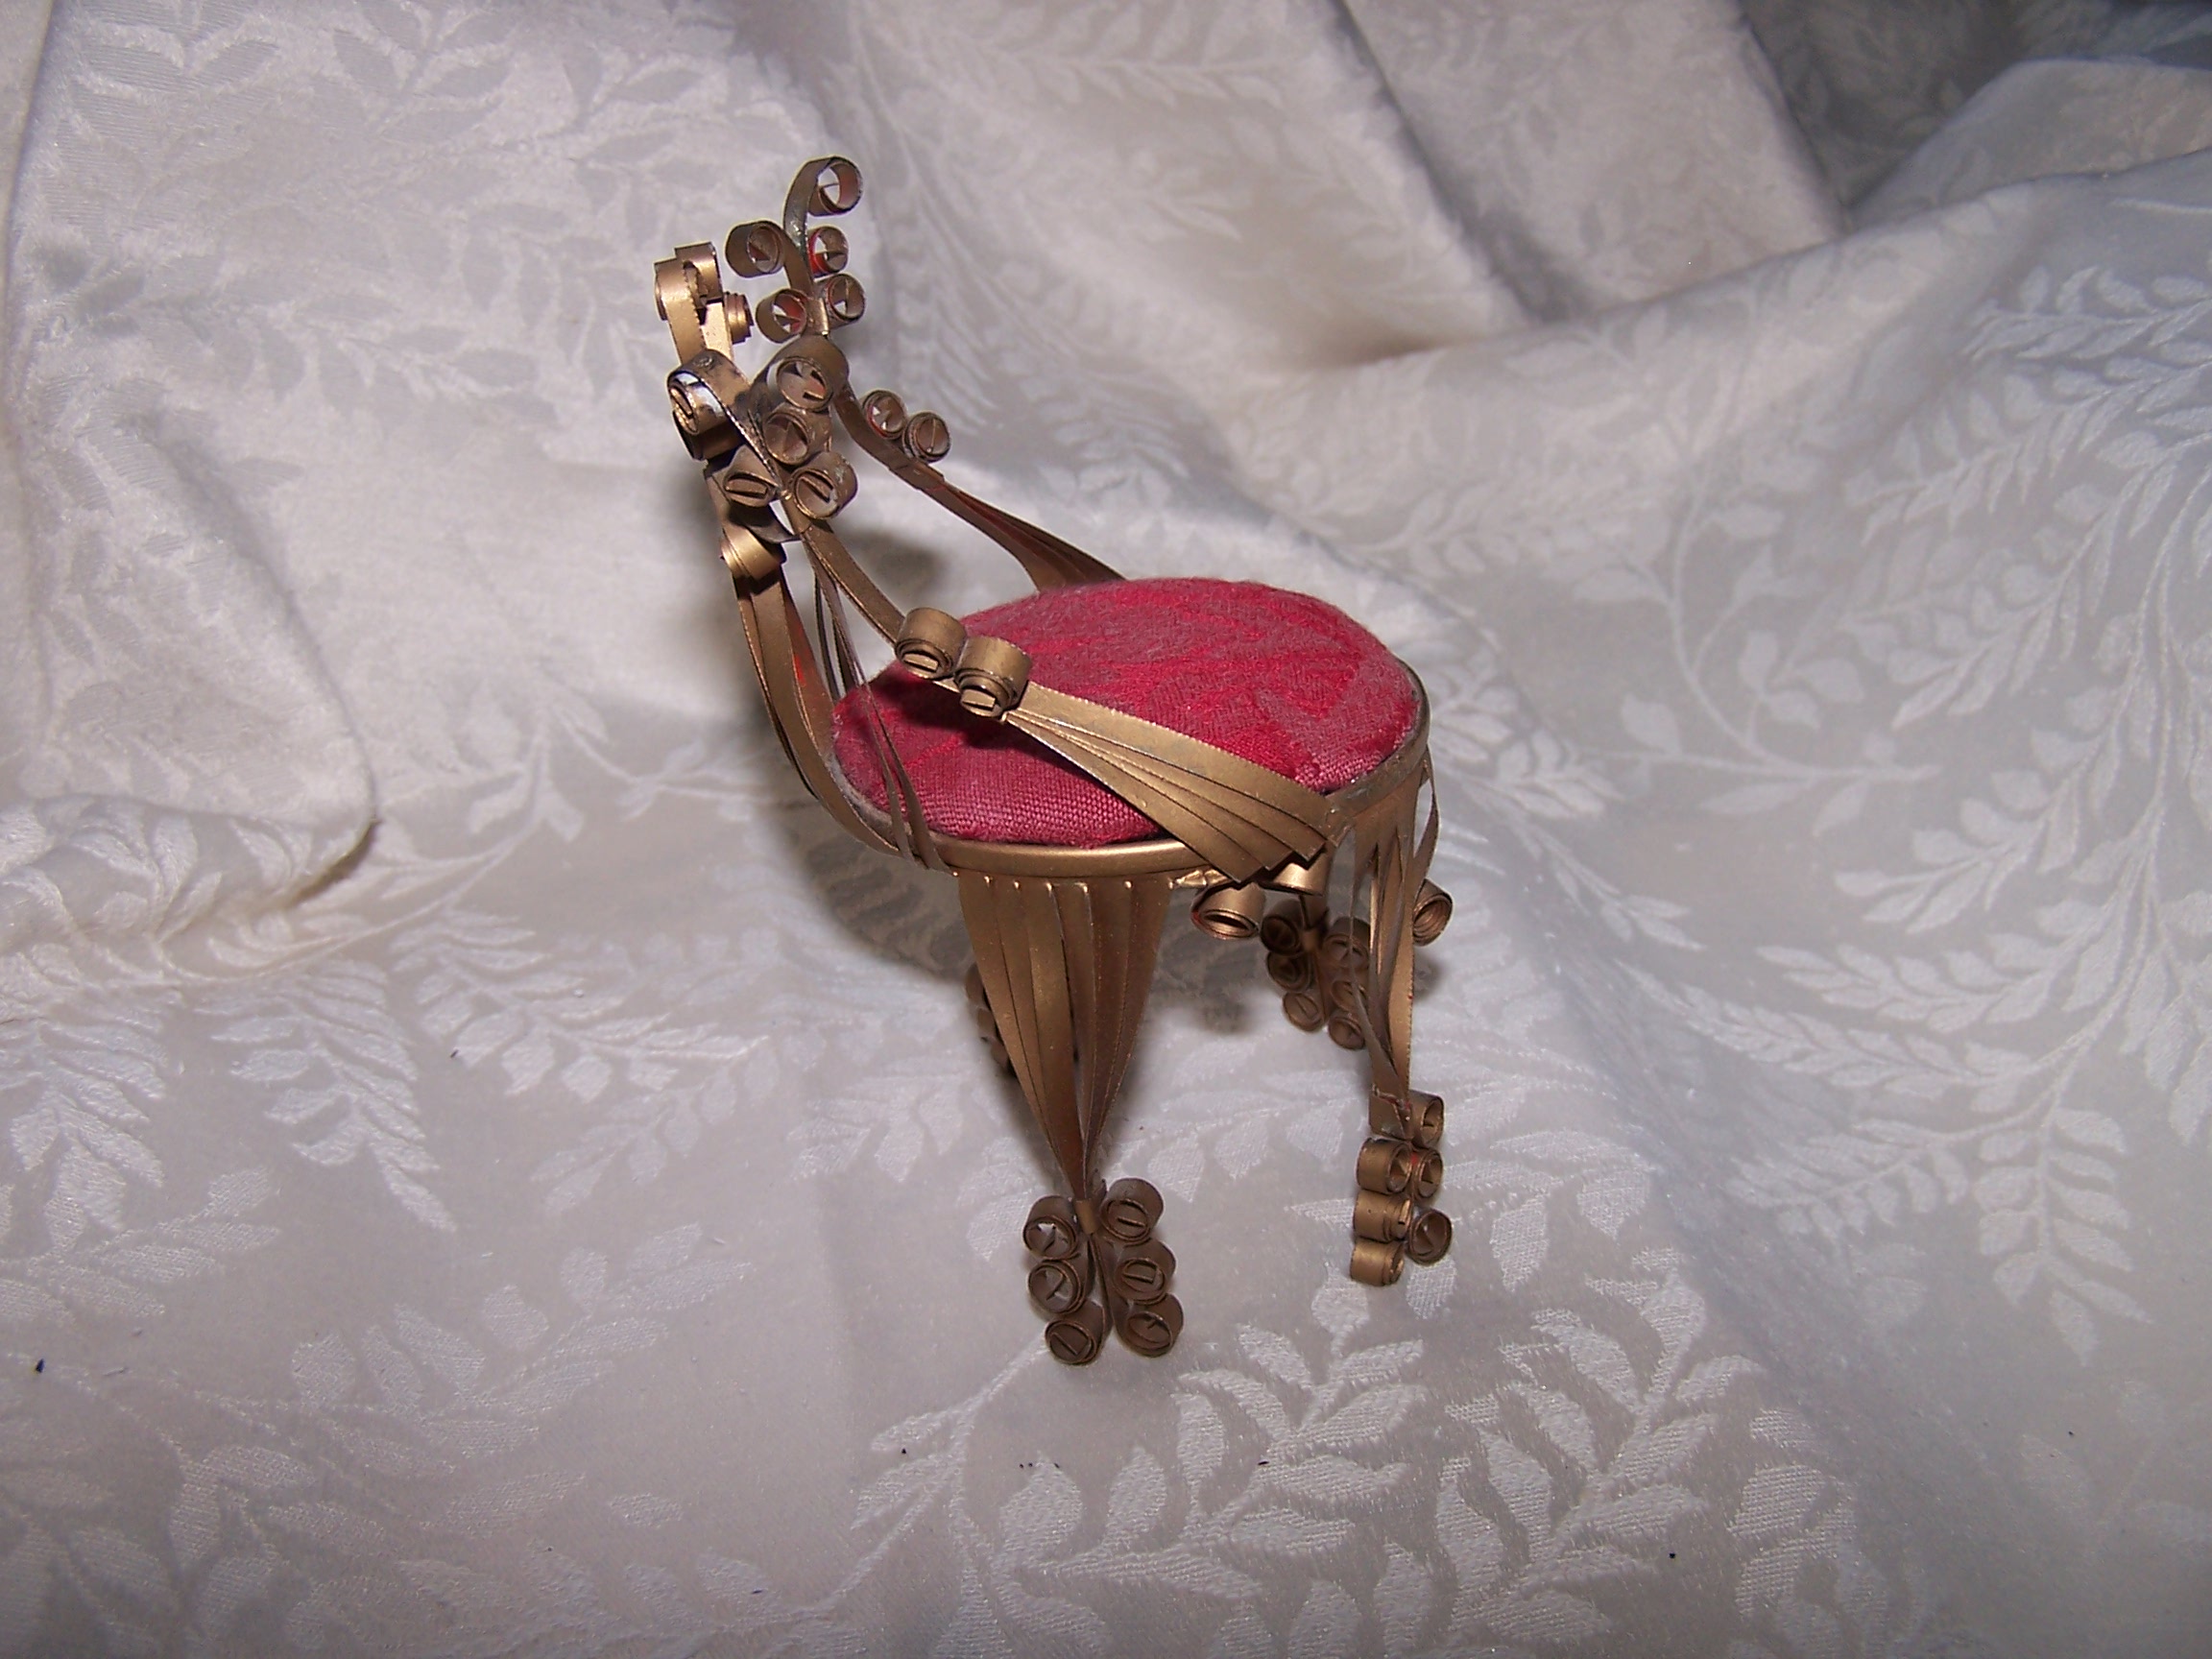 Image 3 of Quilled Pin Cushion Chair, Gold, Red, Folk Art, Vintage